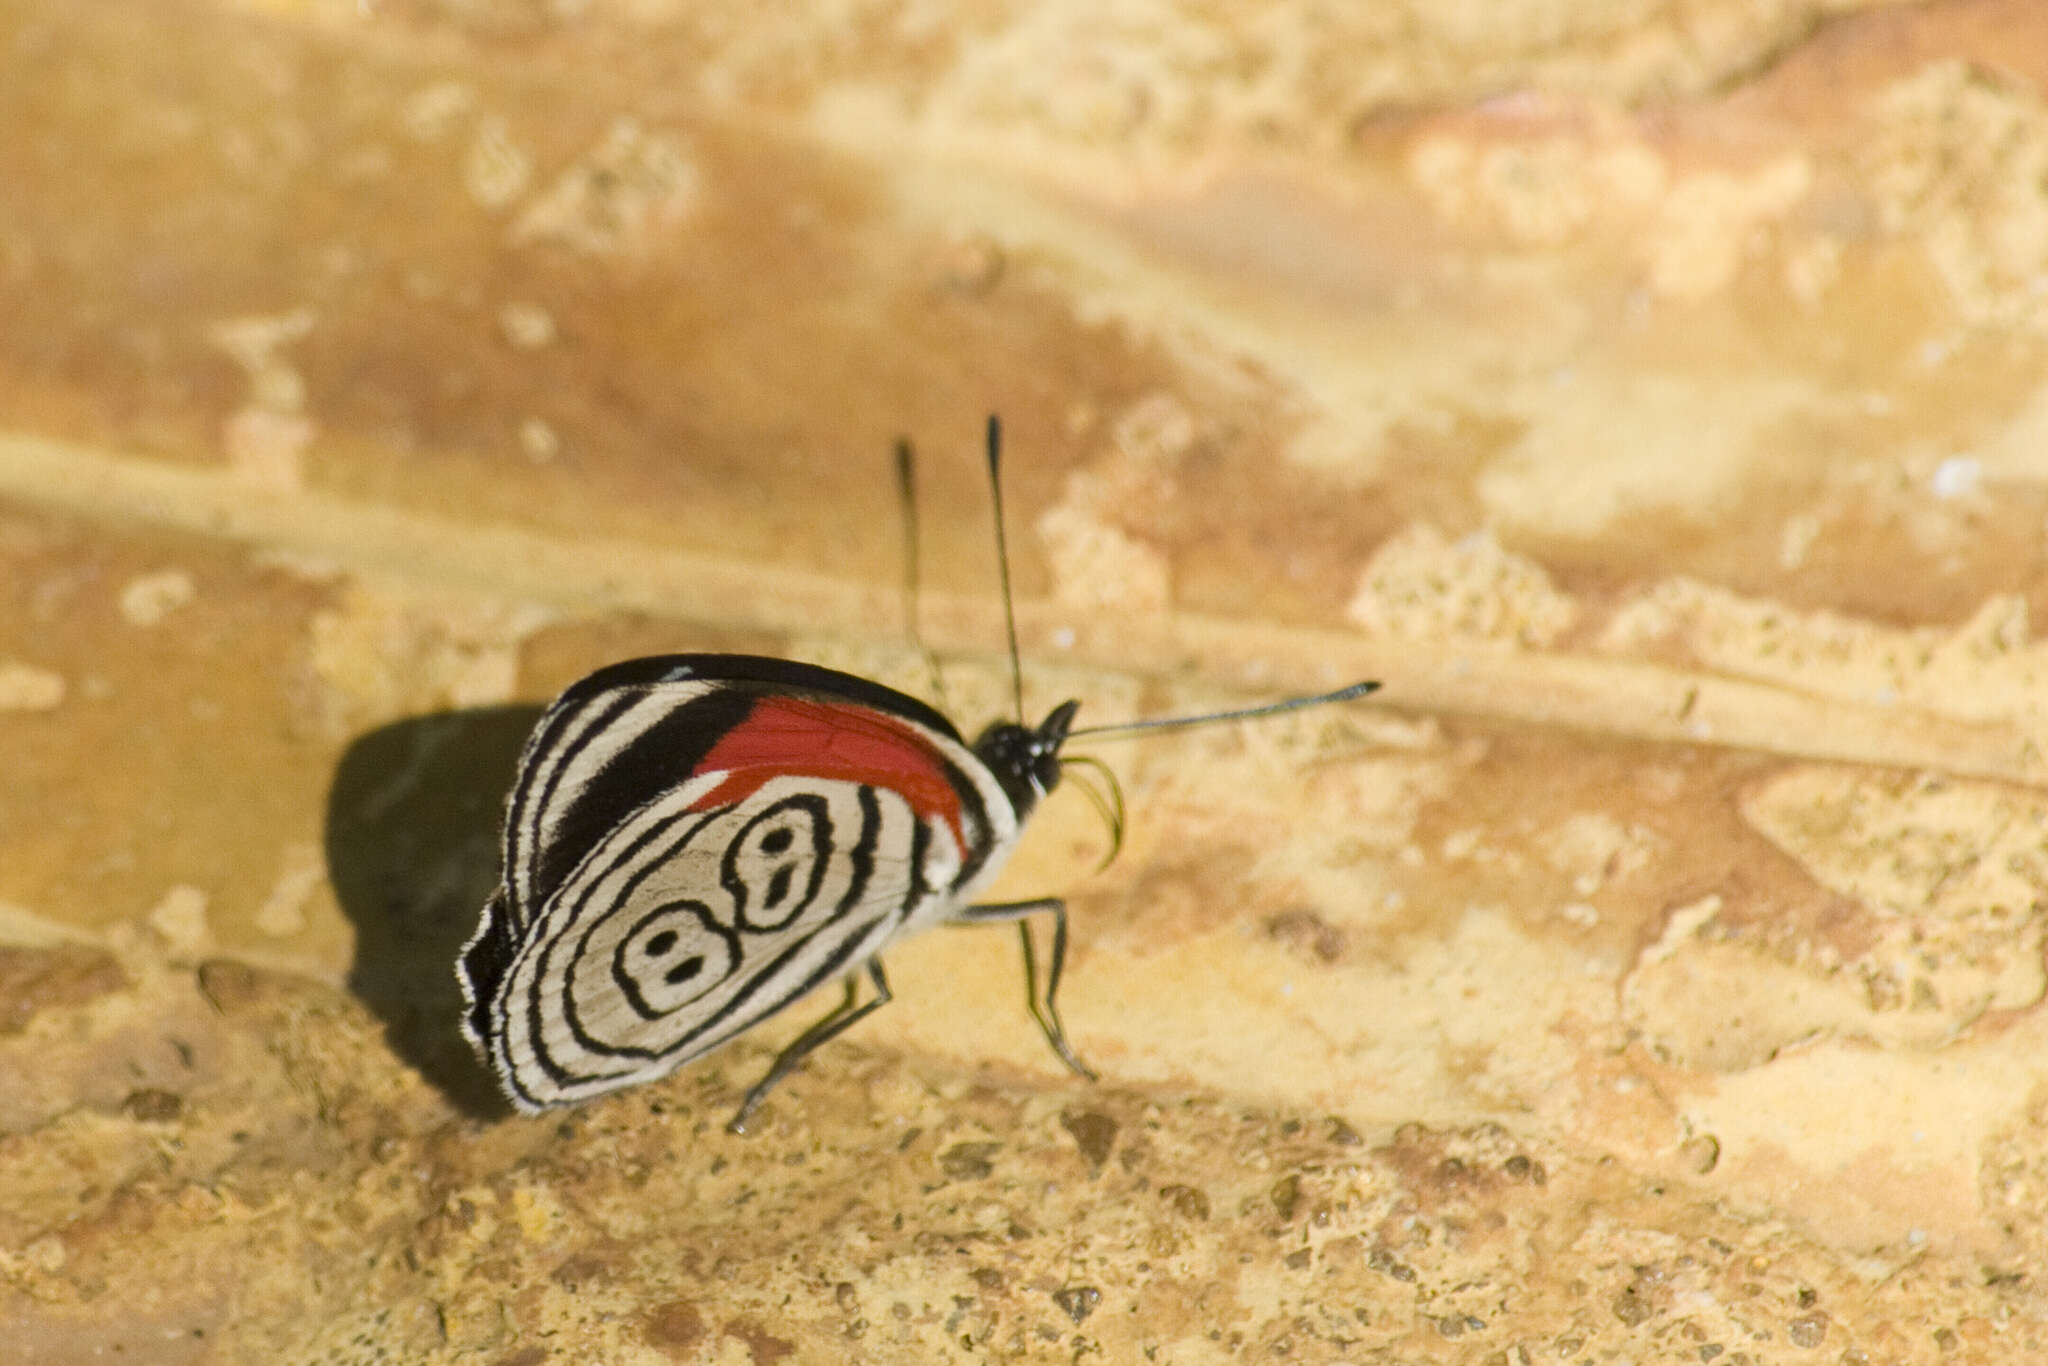 Image of 88 Butterfly